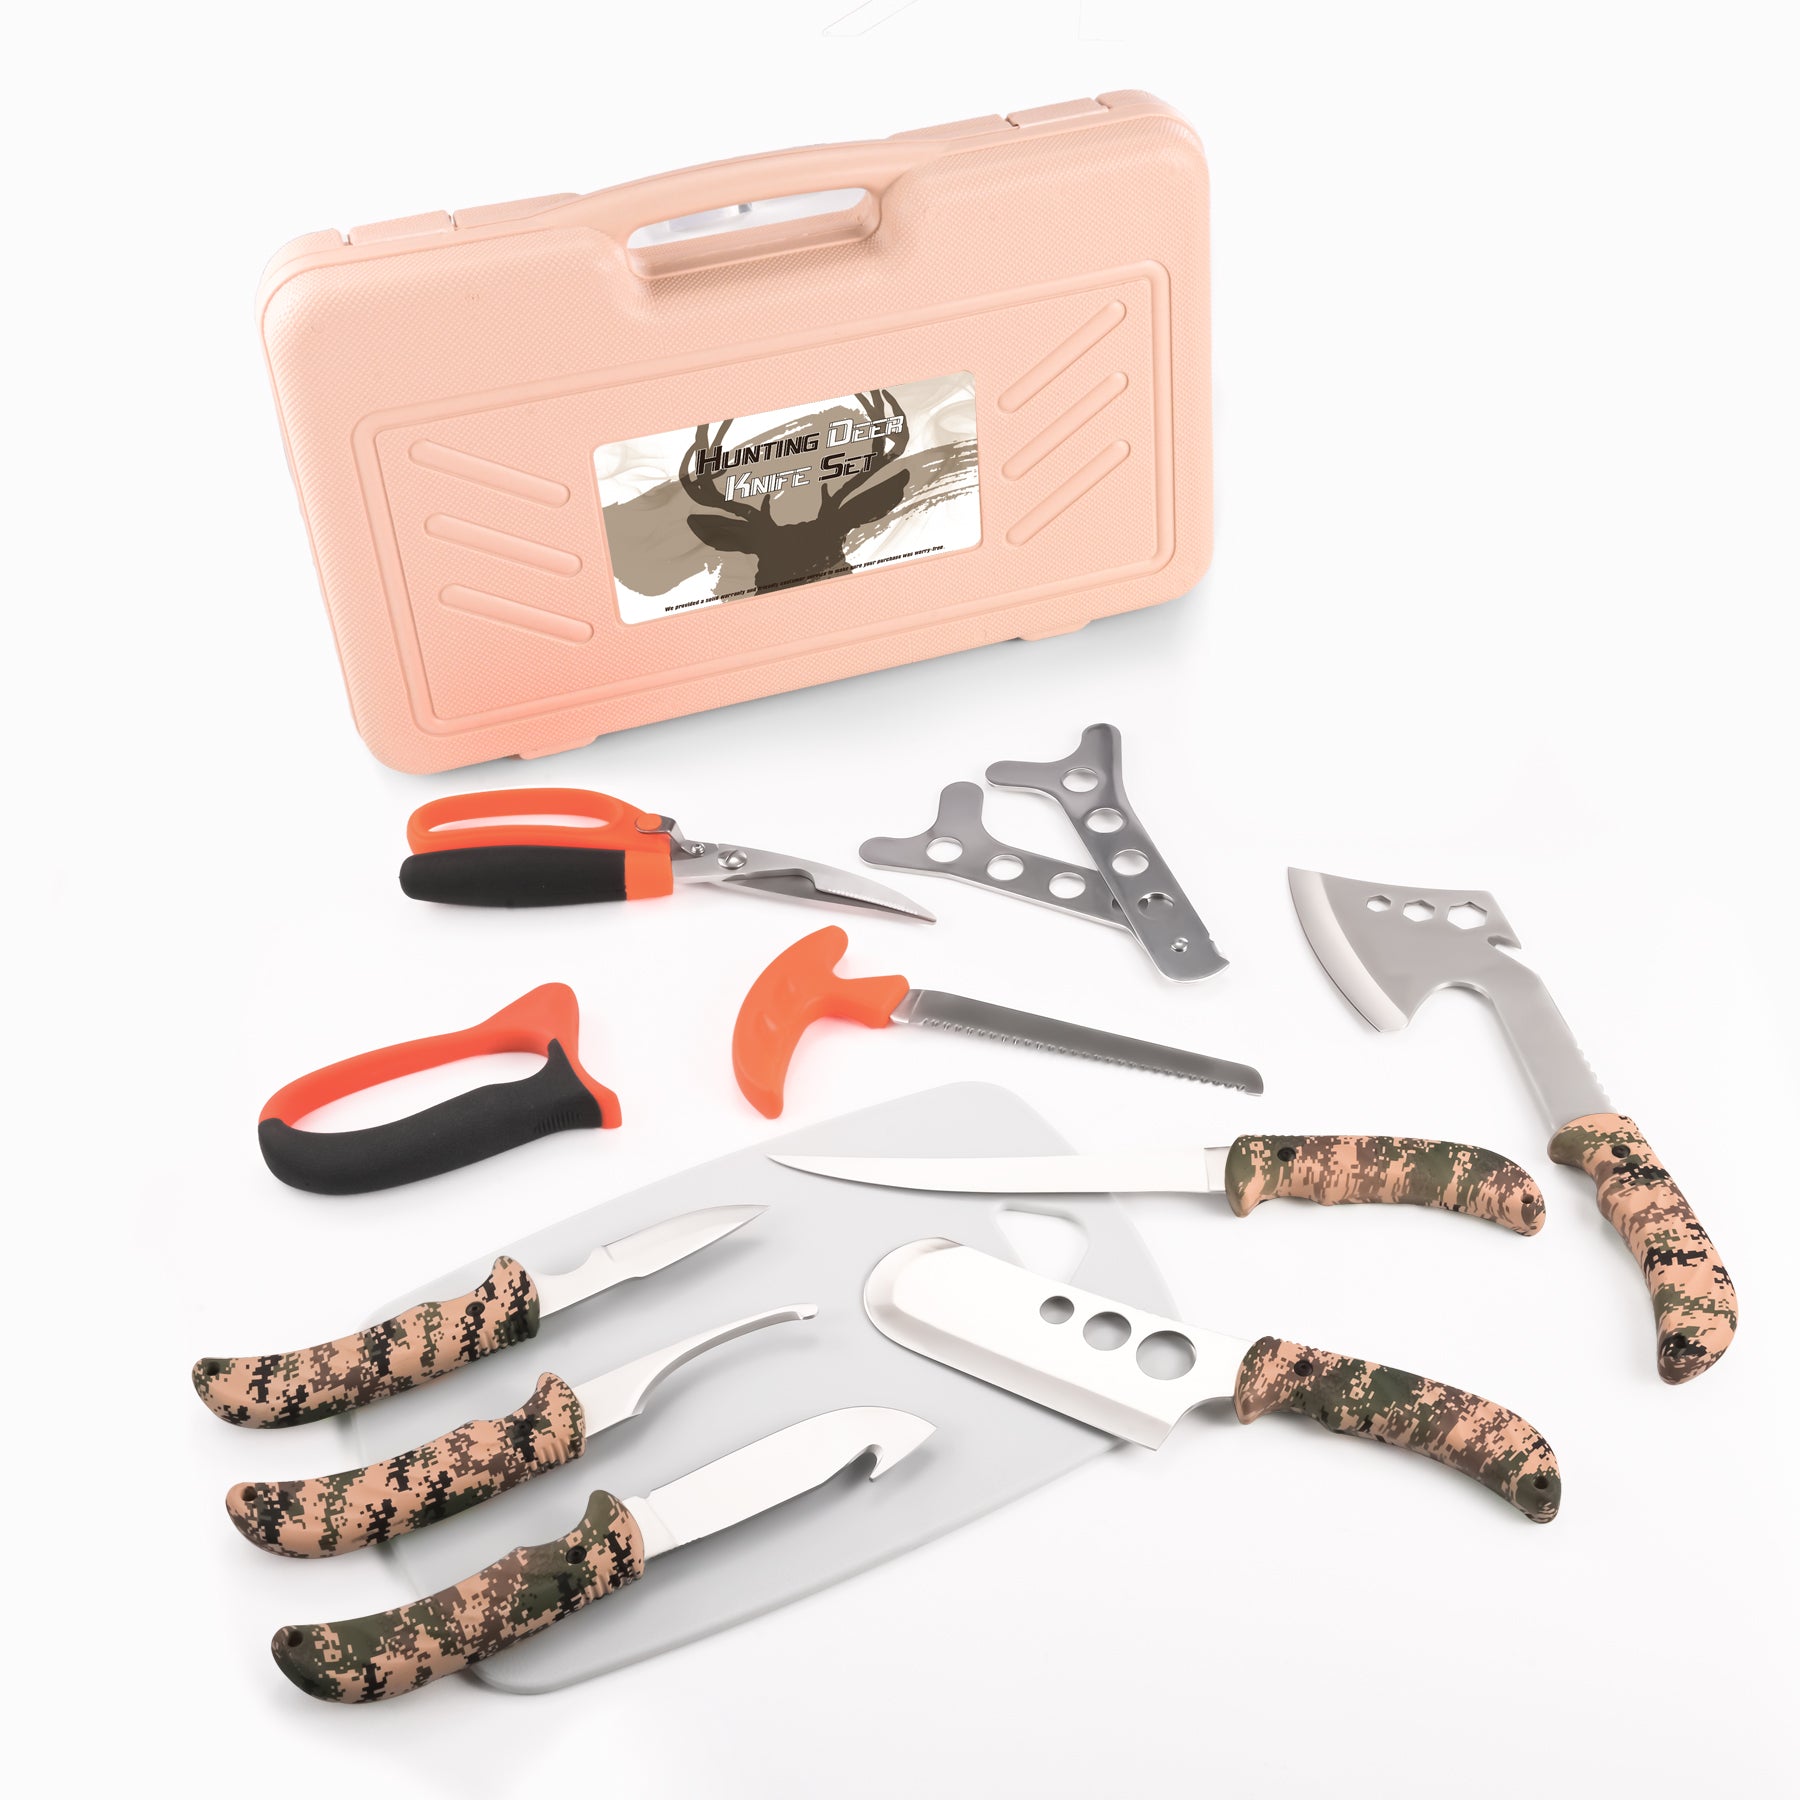 GVDV Hunting Knife Set - 14 Pieces, Portable Butcher Game Processing Kit  for Men, Field Dressing Kit with Gut Hook Skinner Knife, Caping Knife, Axe,  Wood/Bone Saw, Spreader, Gloves and More 14